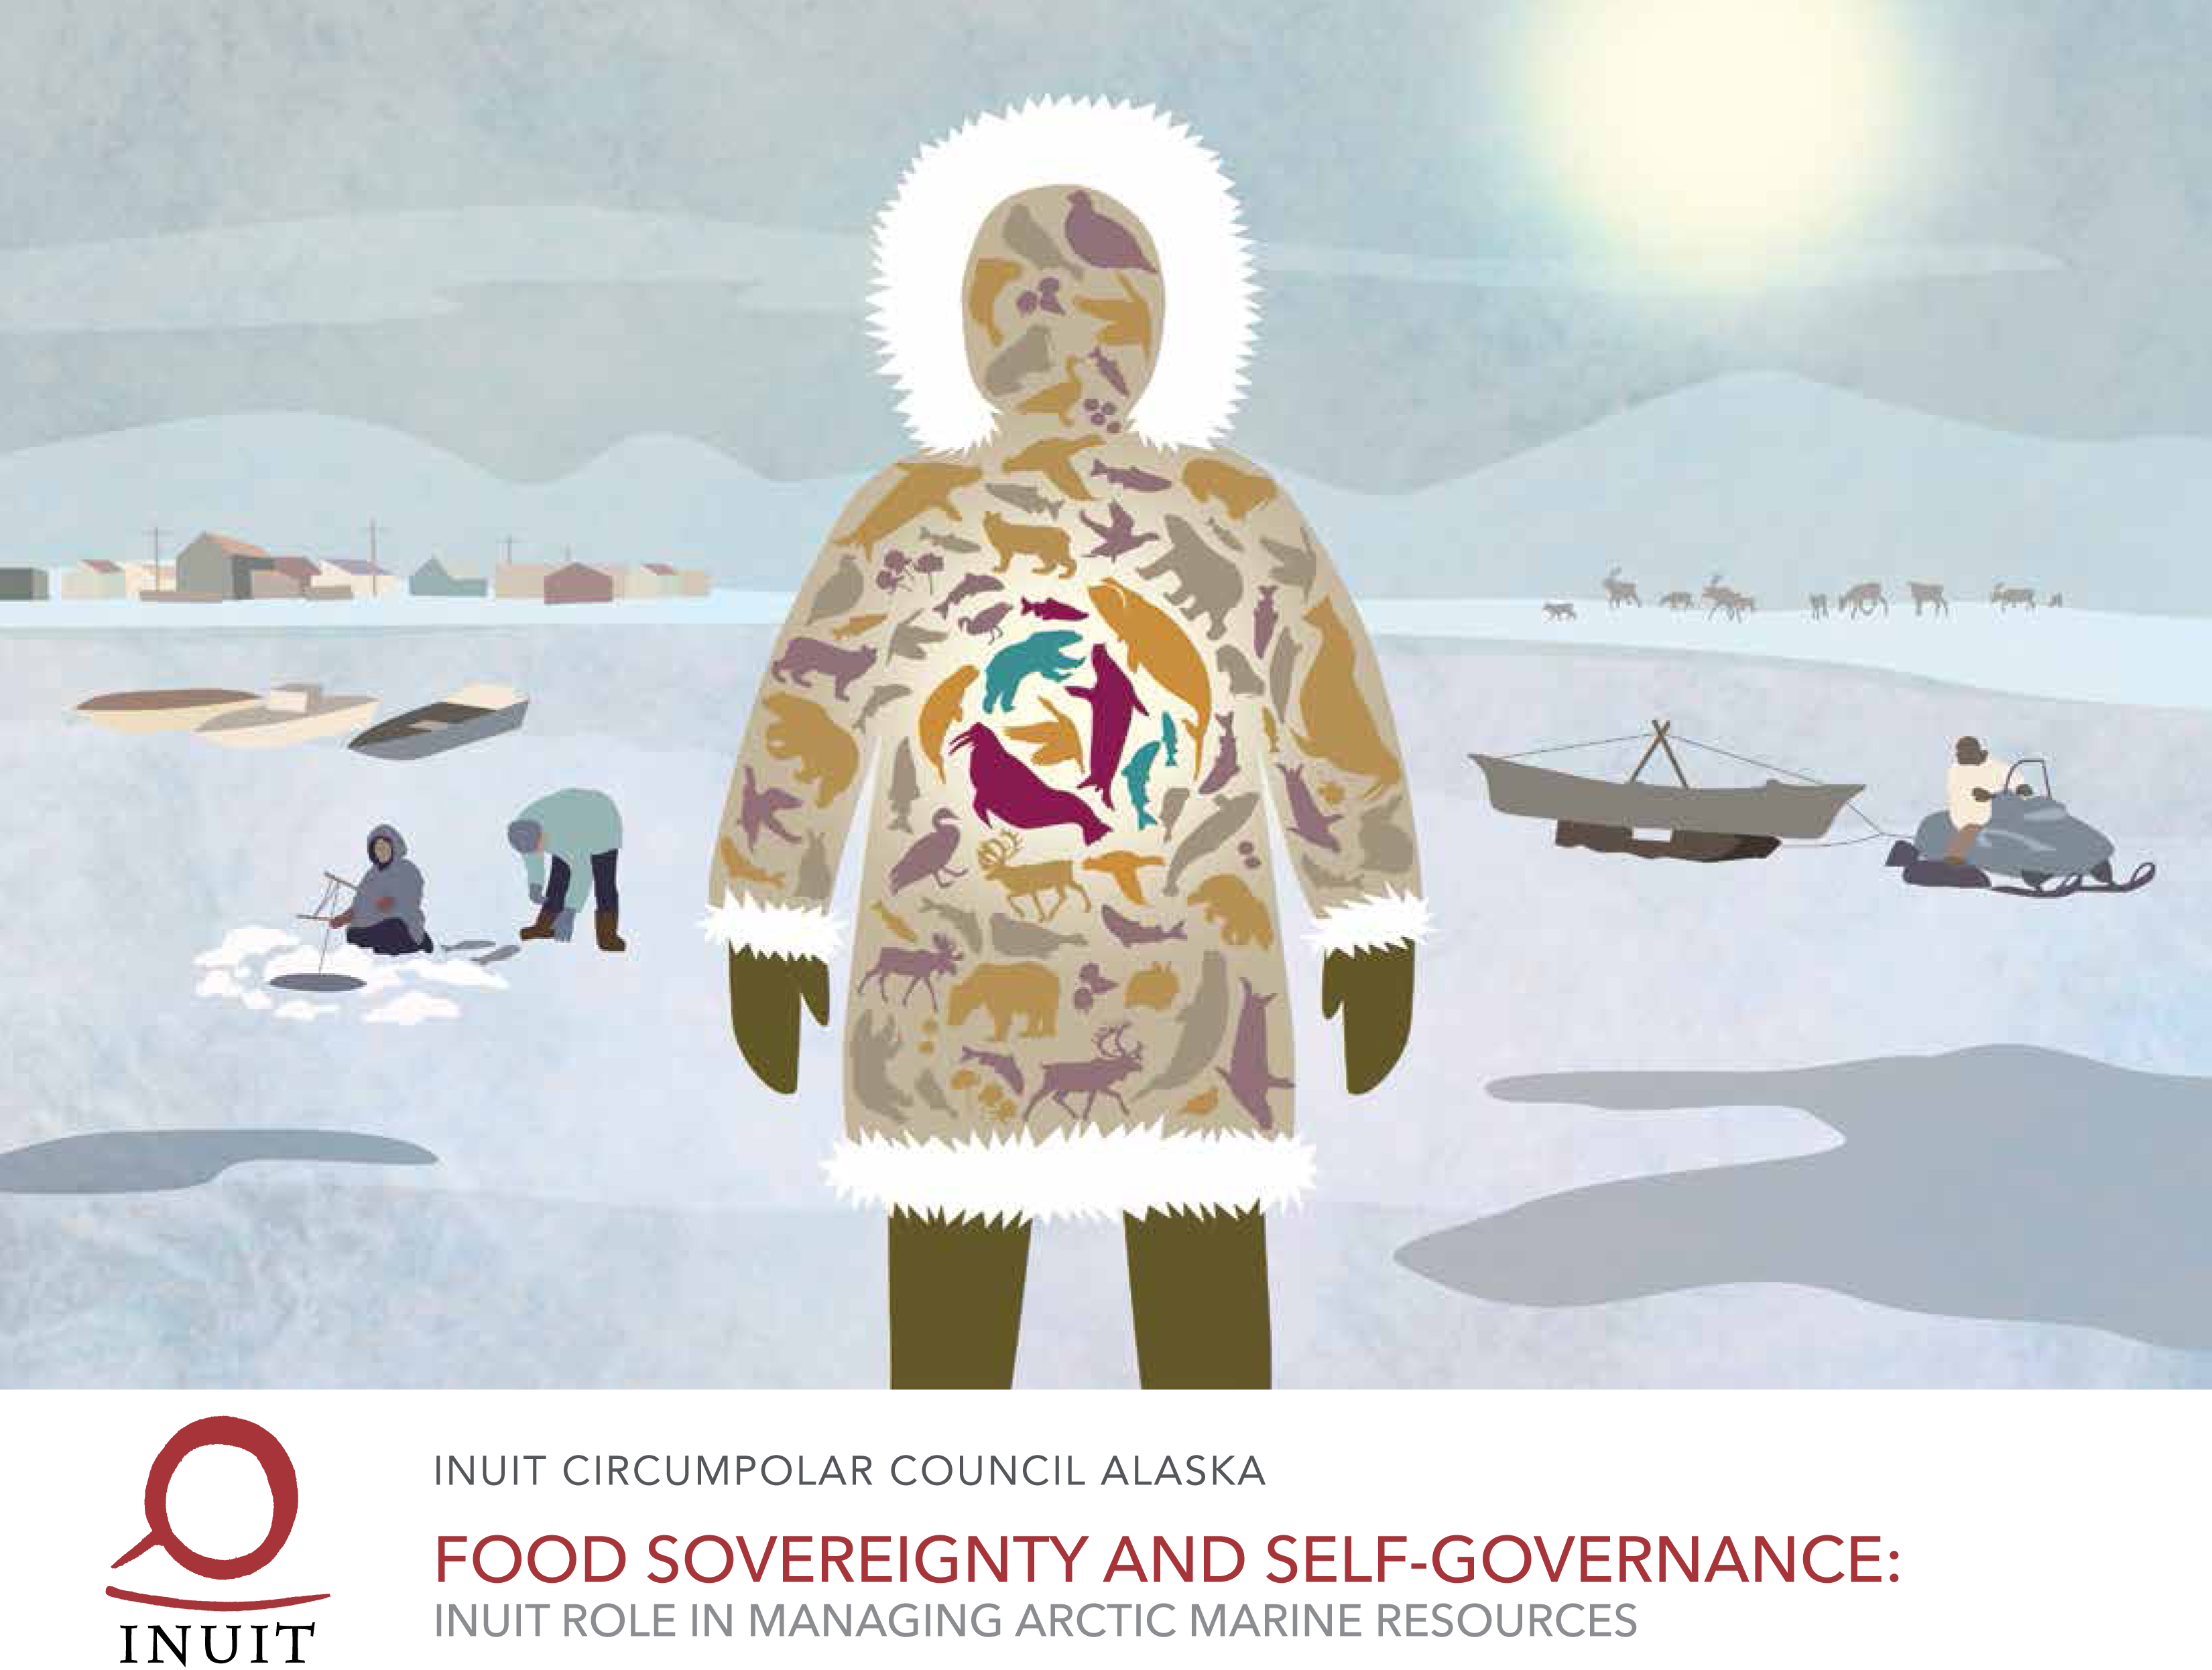 The cover of the Food Sovereignty and Self-Governance Report 